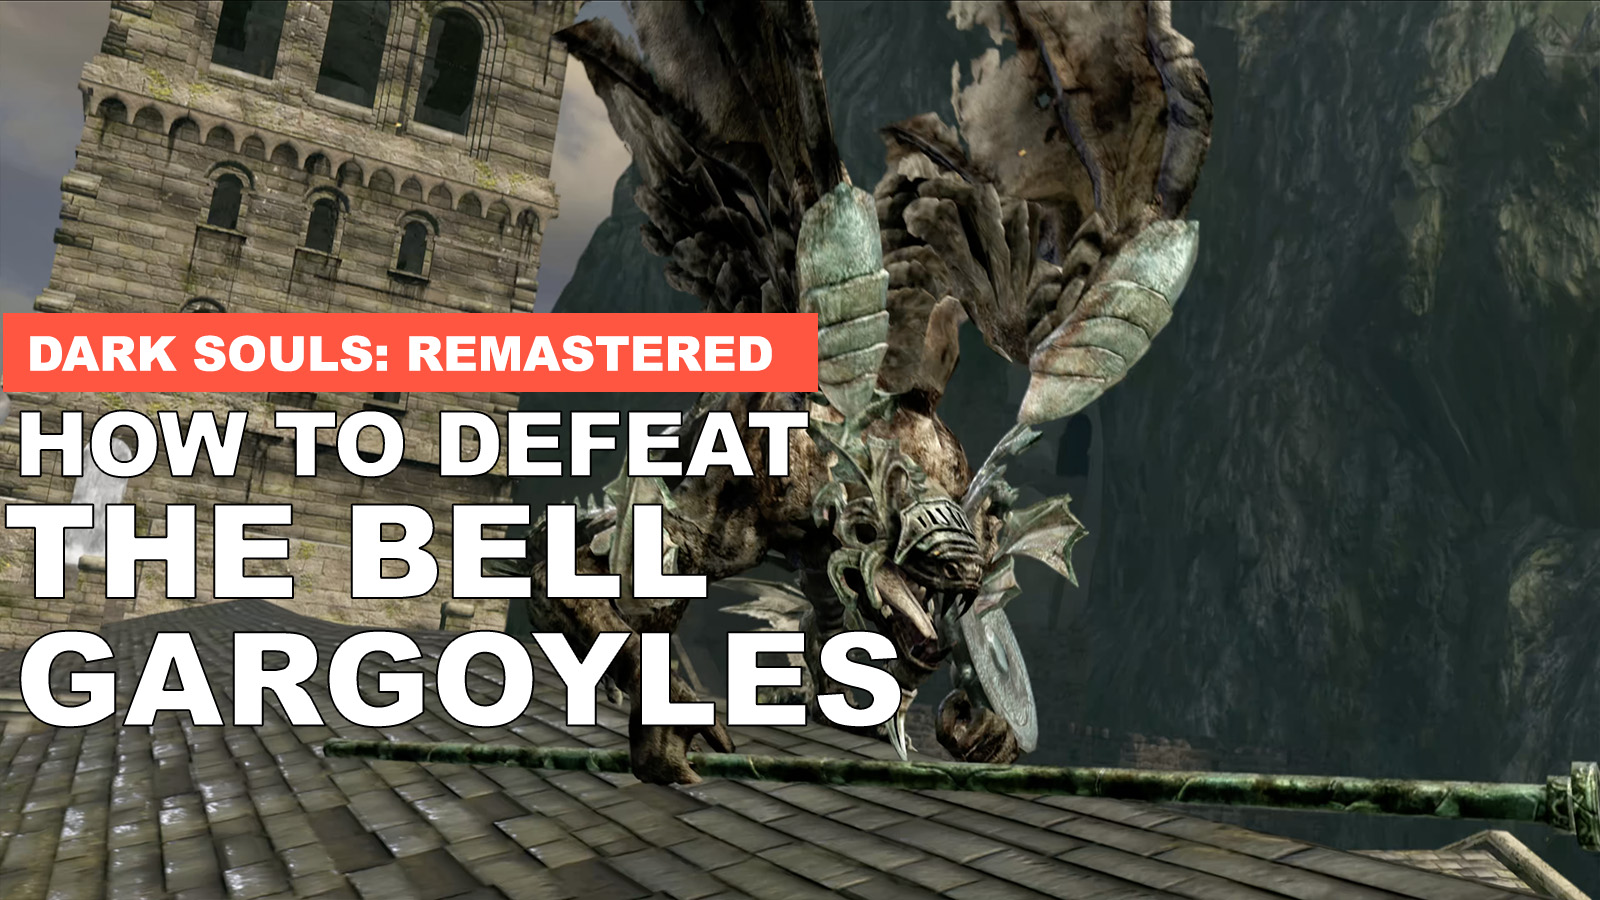 How To Defeat The Bell Gargoyles In Dark Souls: Remastered